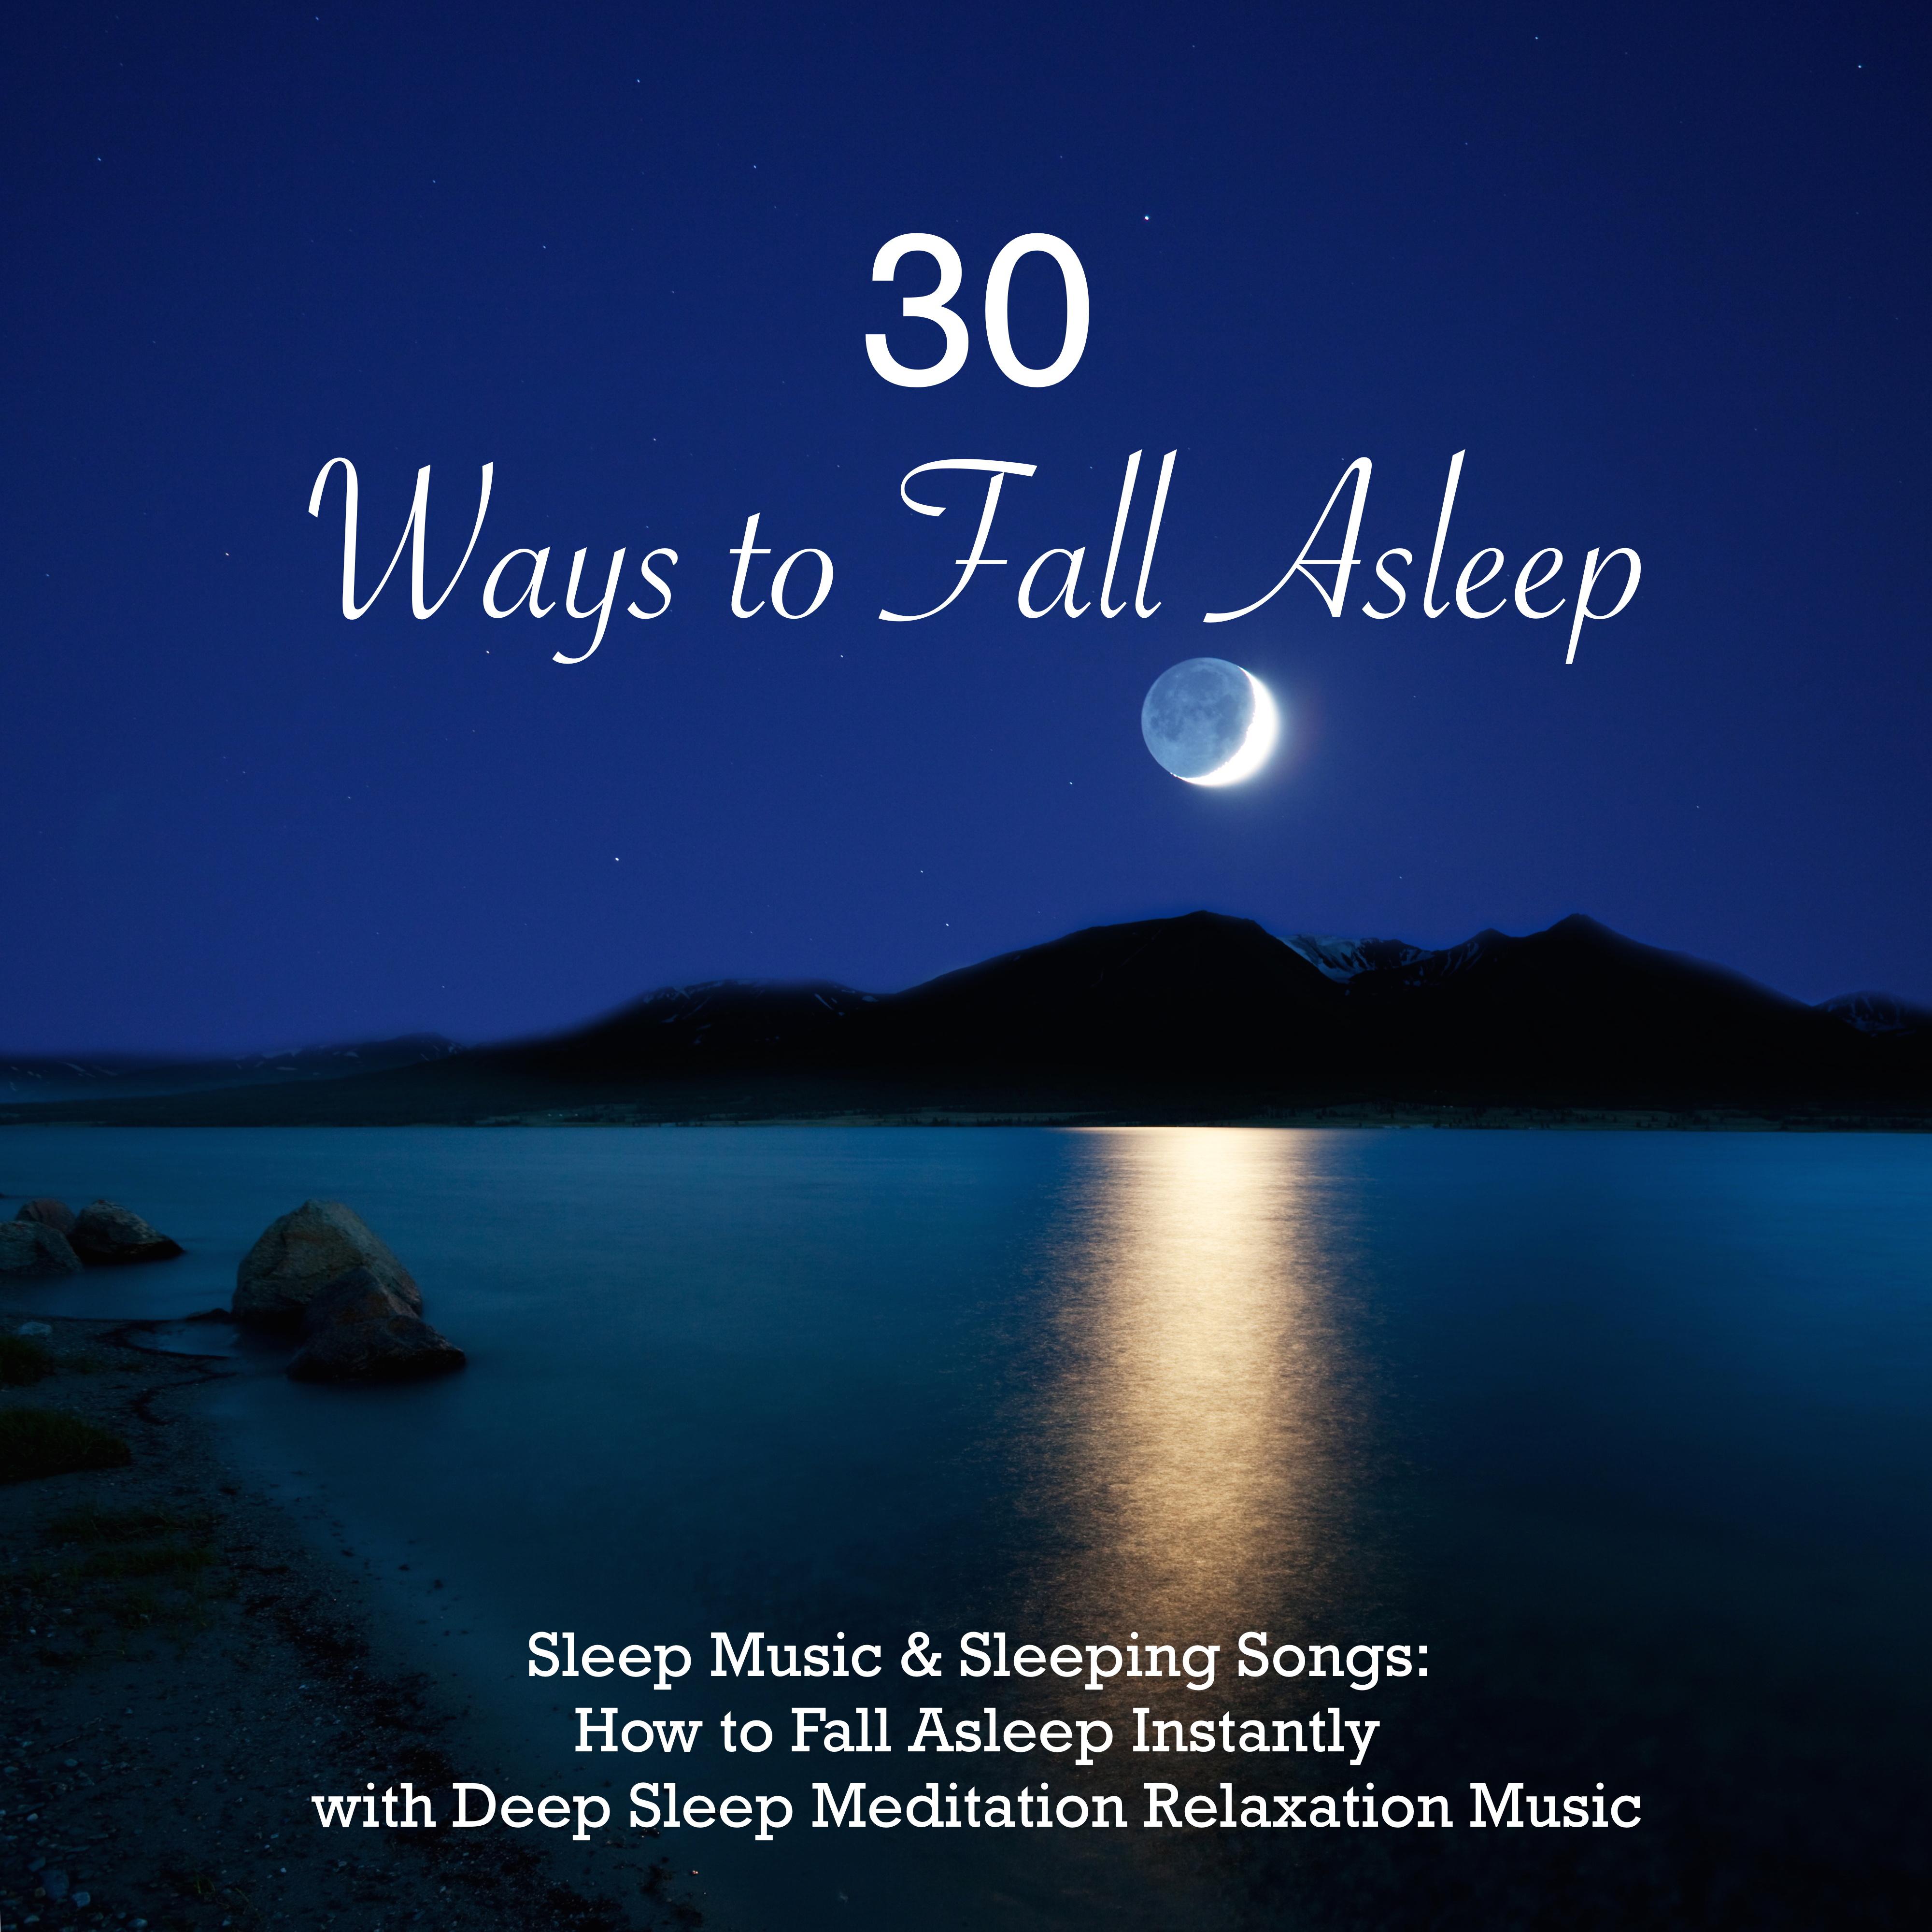 How to Fall Asleep Quickly